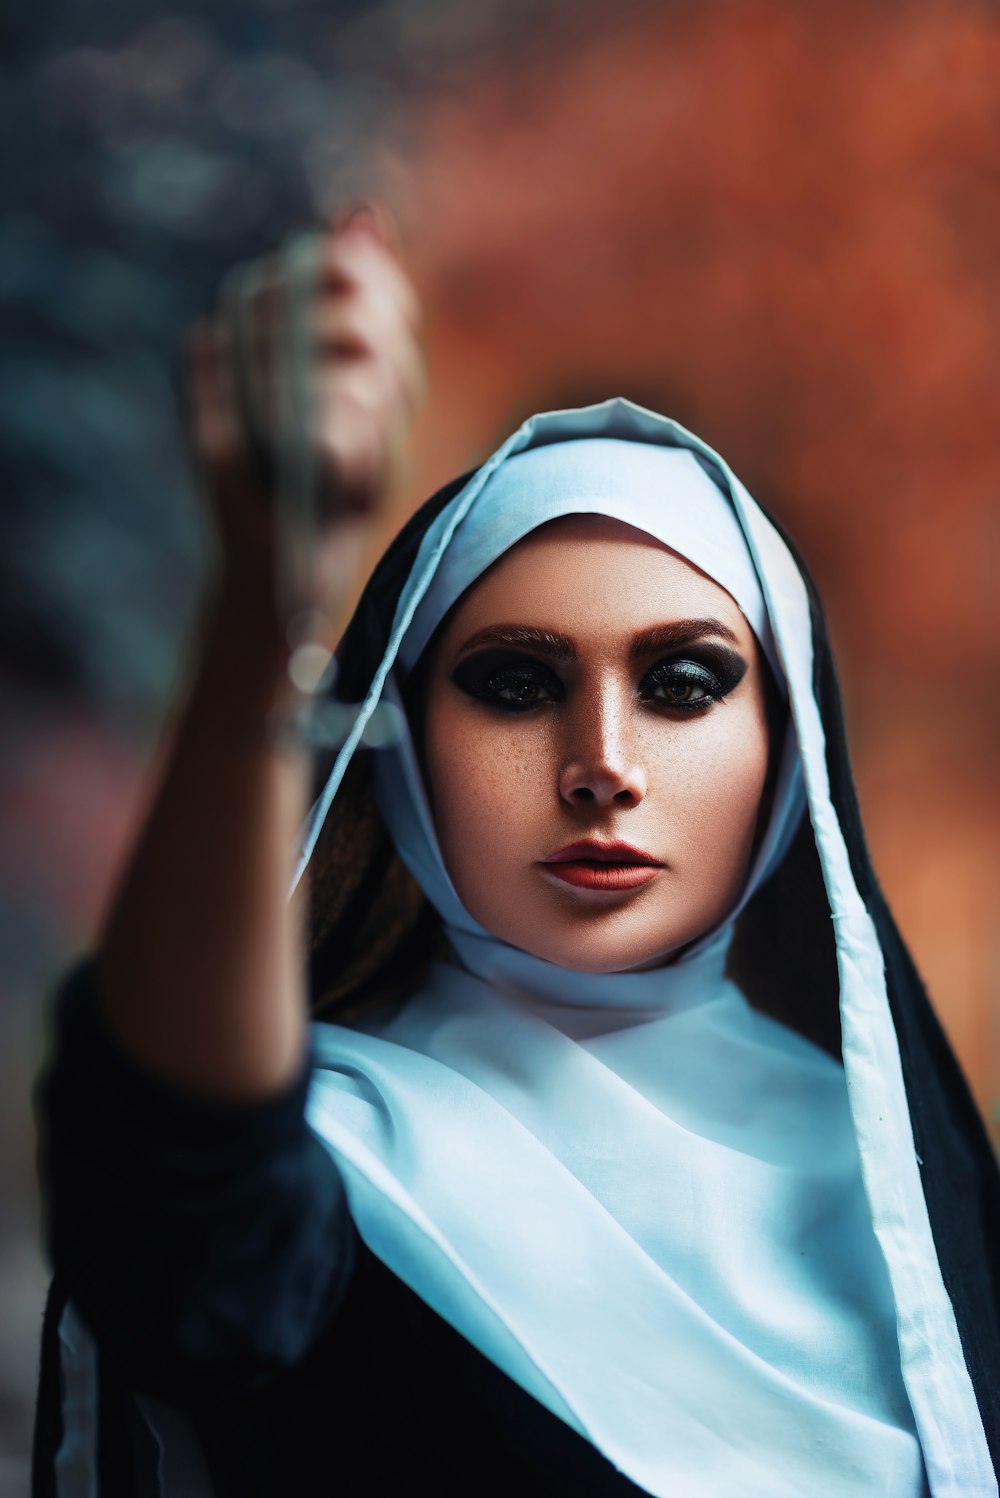 shallow focus photo of woman holding silver-colored cross